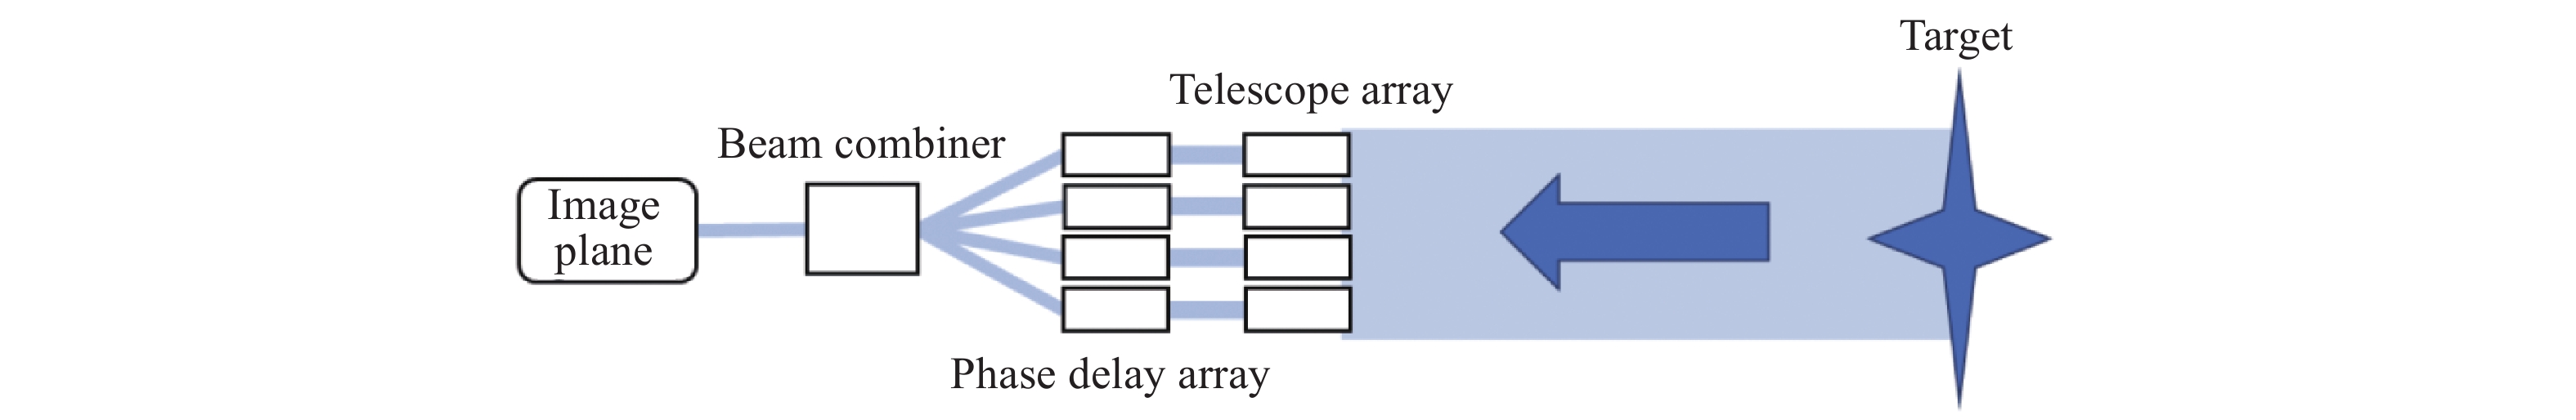 Schematic of optical phased array technology in long-distance high-resolution imaging